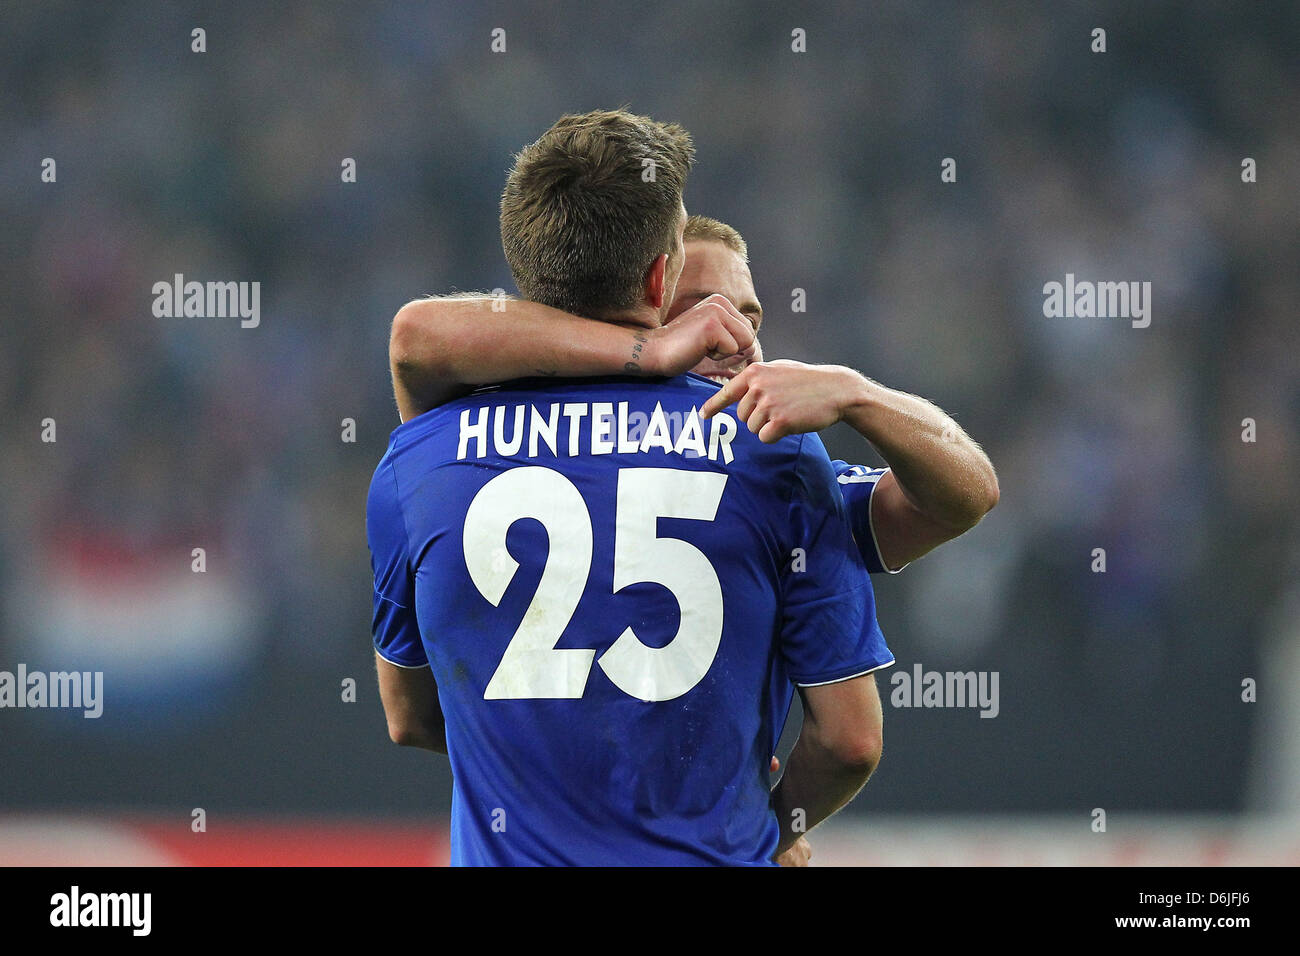 Schalke's Klaas-Jan Huntelaar (L) and Lewis Holtby (R) celebrate during the Europa League match between Schalke 04 and Twente Enschede at Veltins Arena in Gelsenkirchen, Germany, 15 March 2012. Photo: Revierfoto Stock Photo